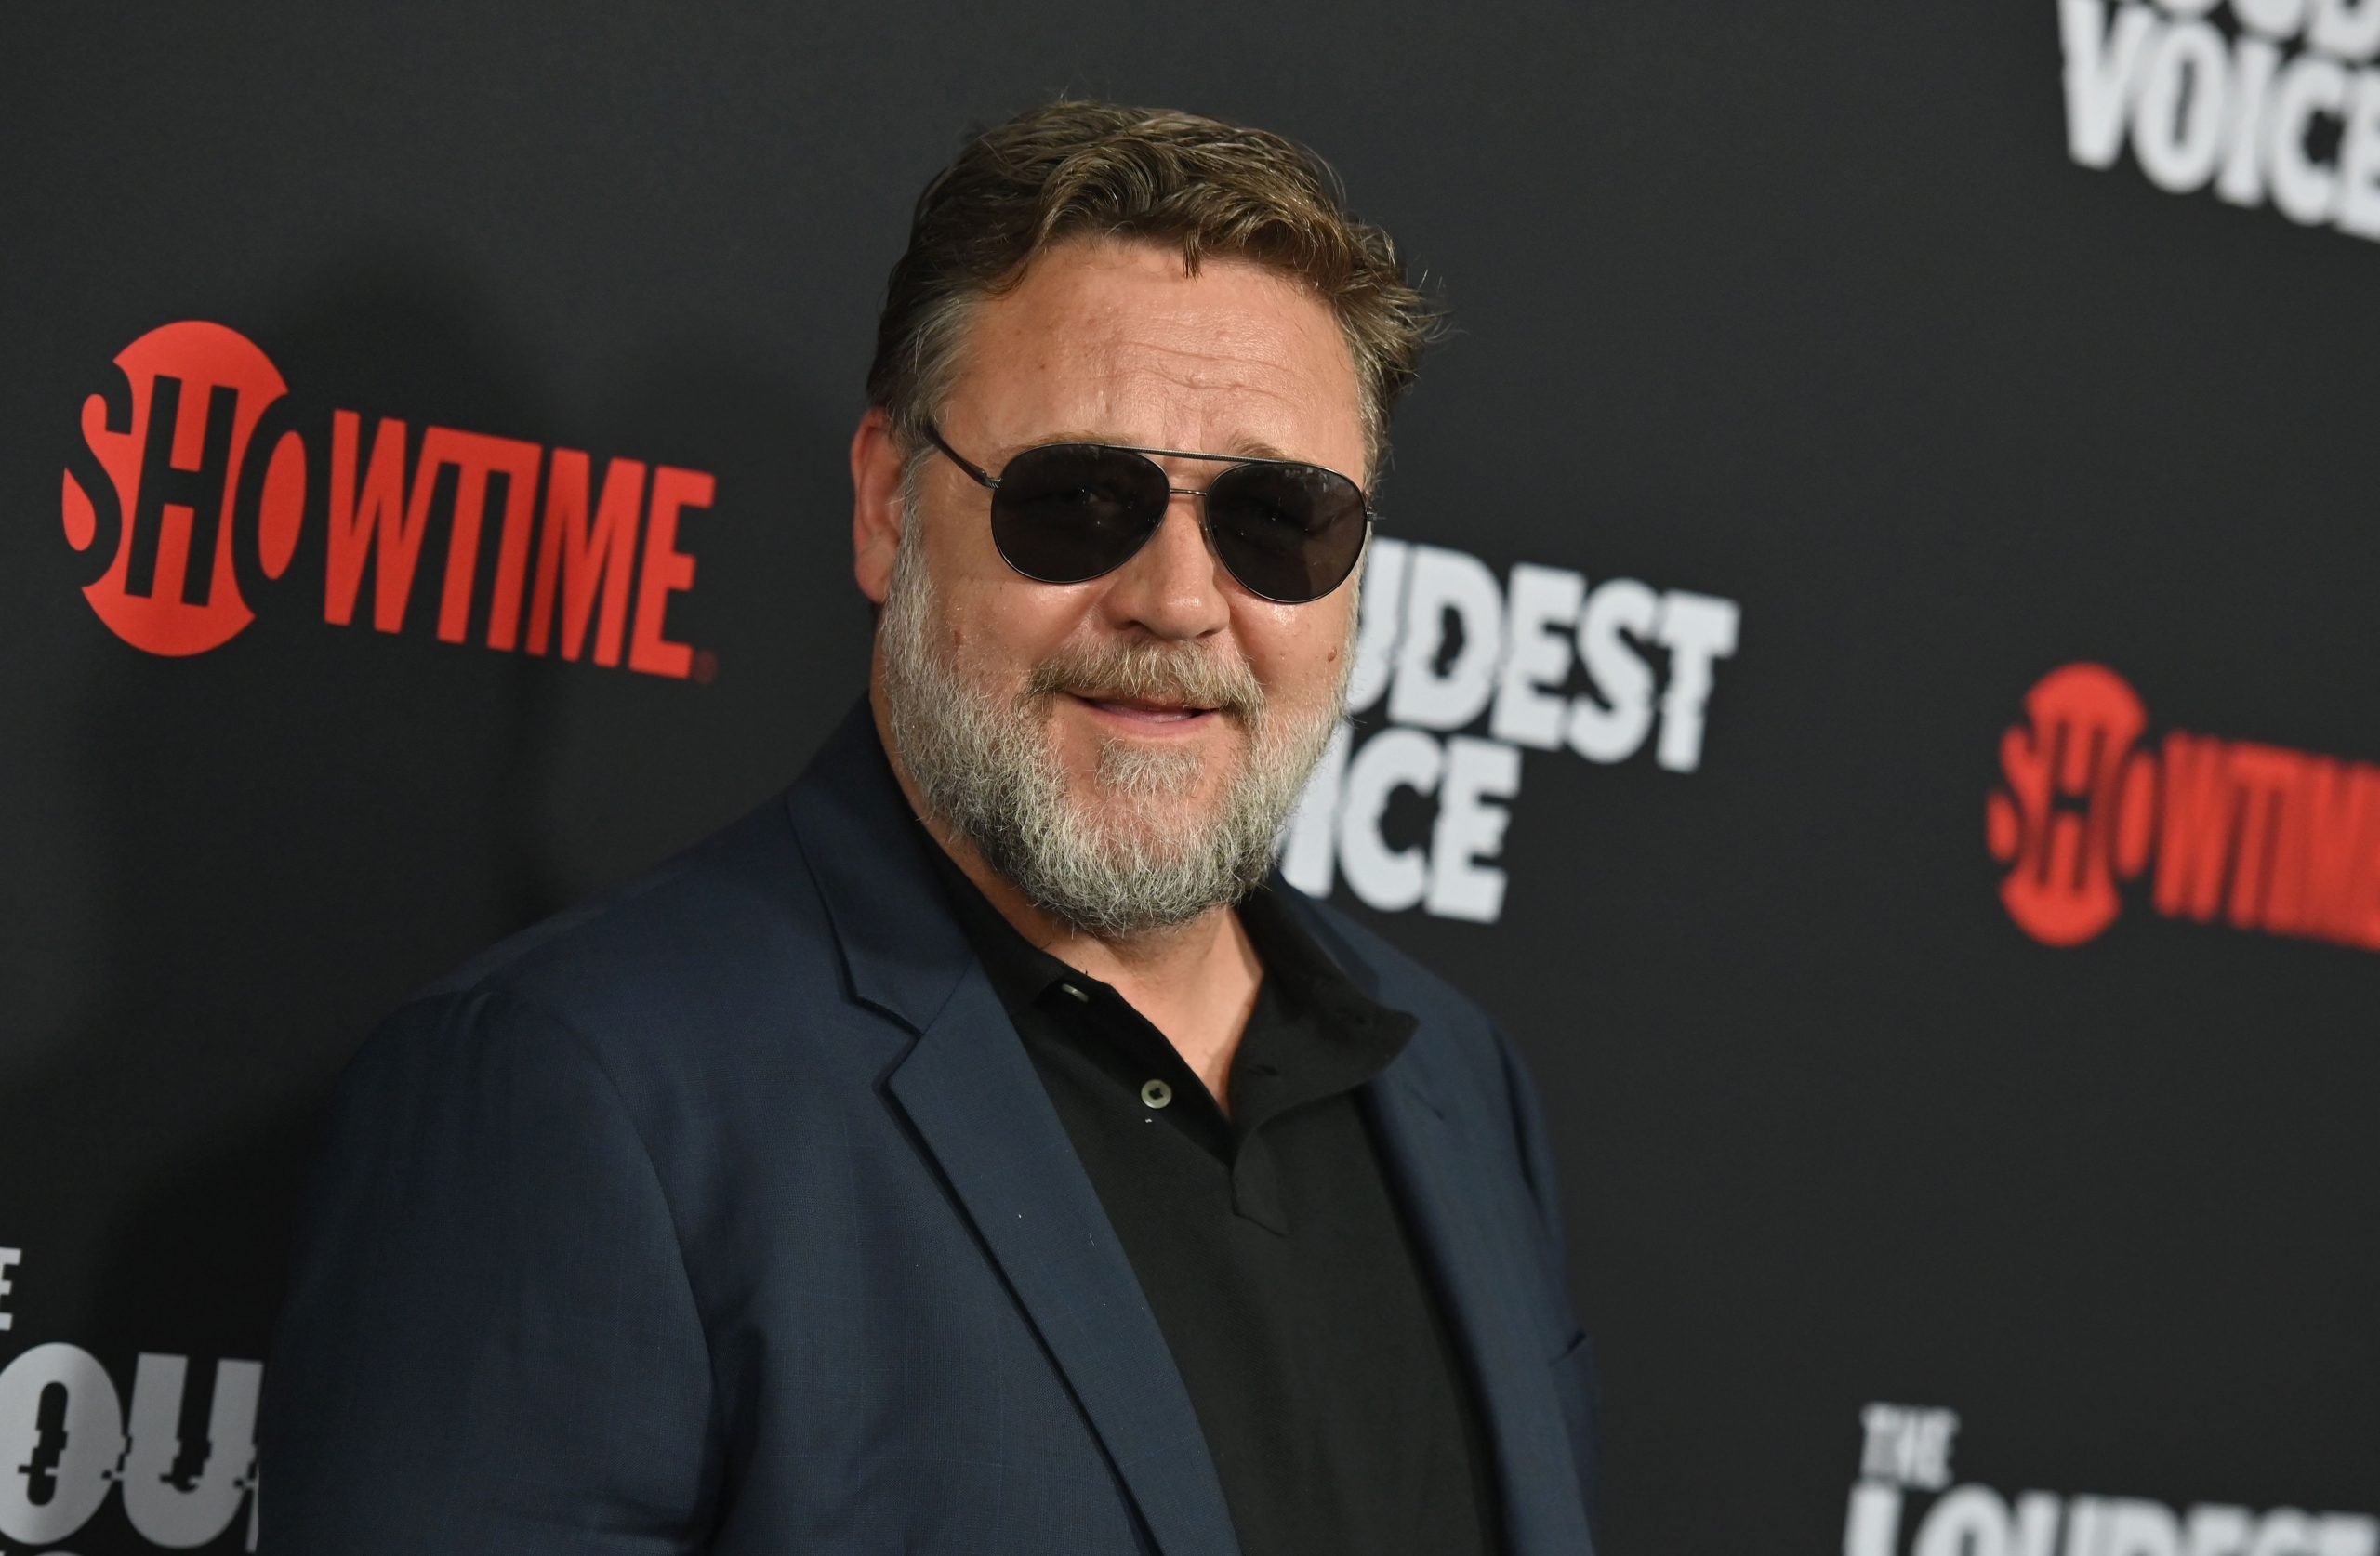 ‘The Loudest Voice:’ Russell Crowe Explains Why He Chose the ‘Challenging’ Role of Roger Ailes